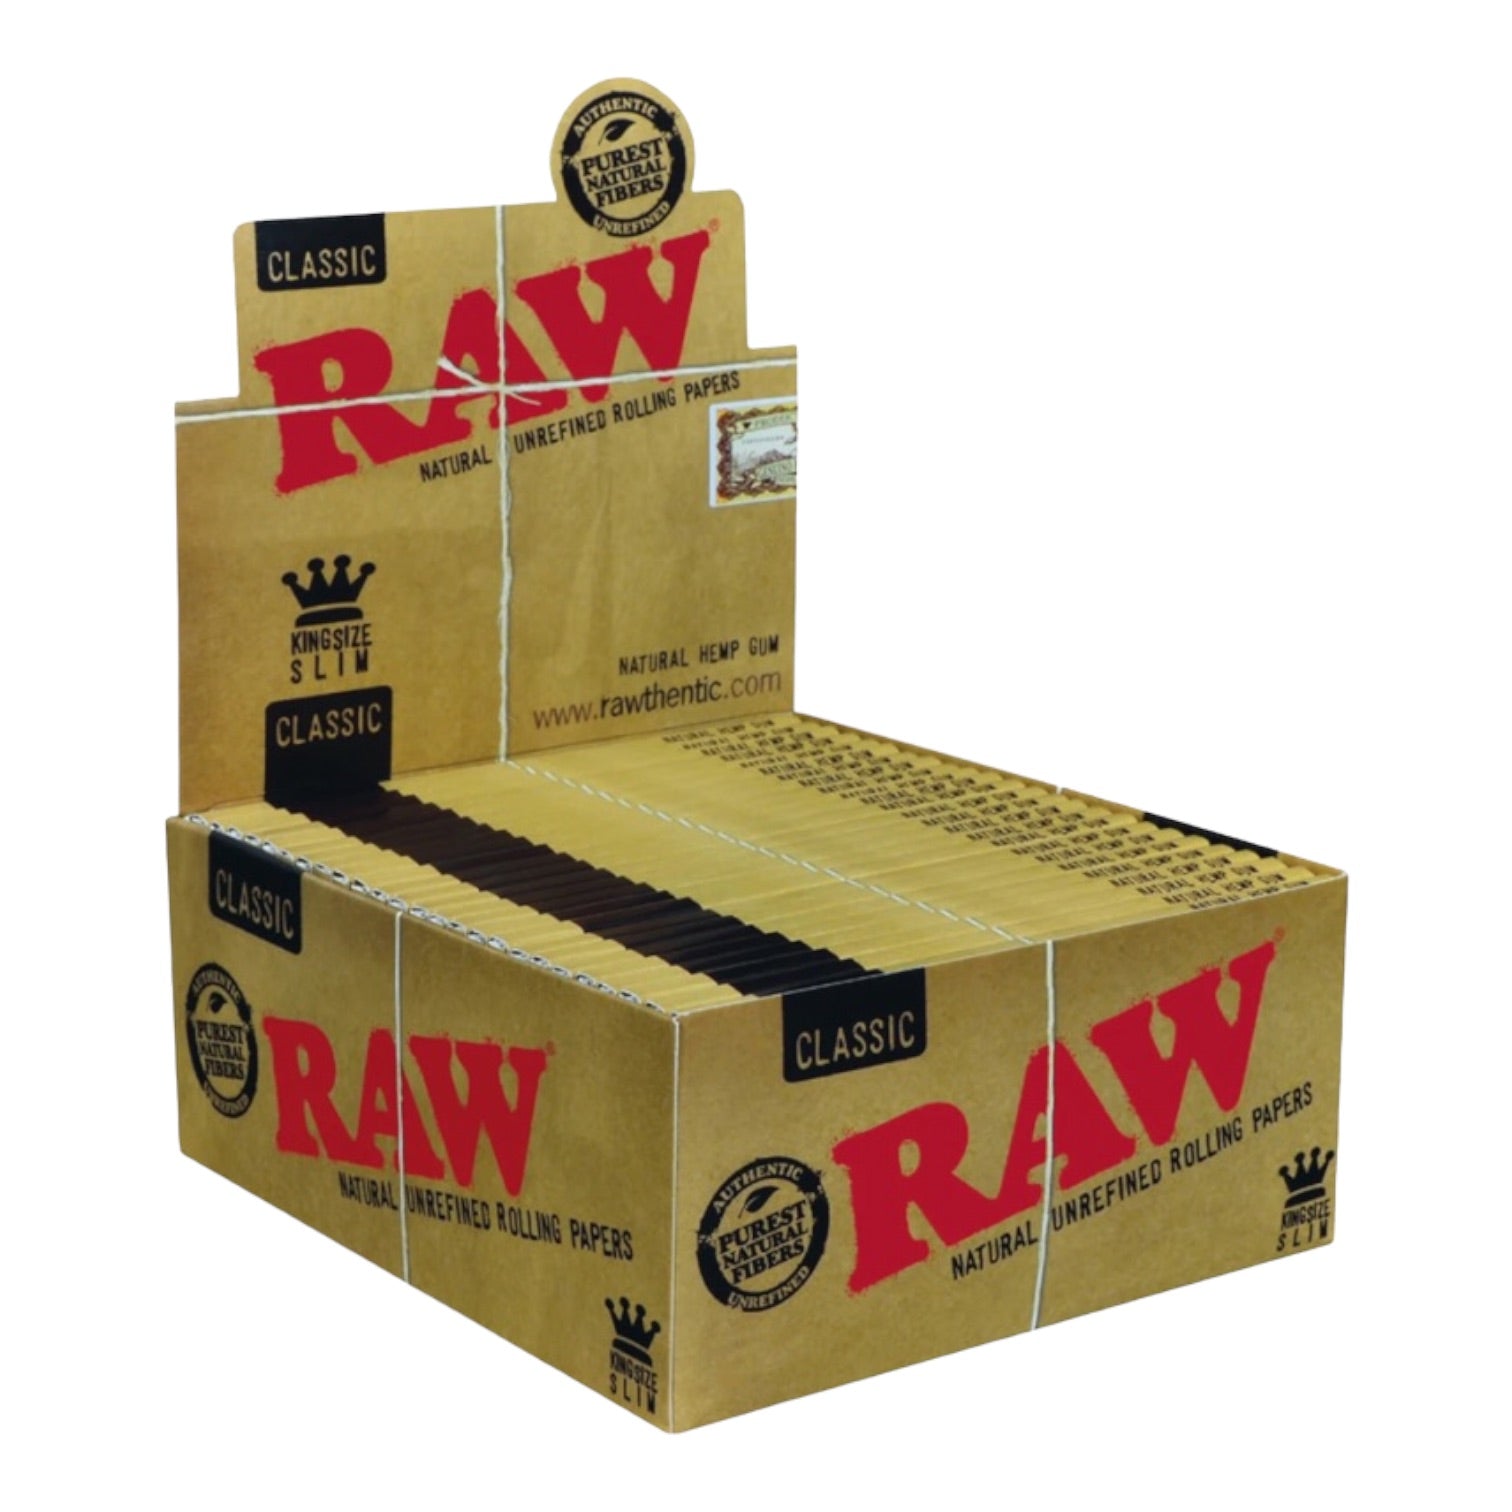 RAW - BOX Of Classic King Size Slim Papers - 50 Pack Box